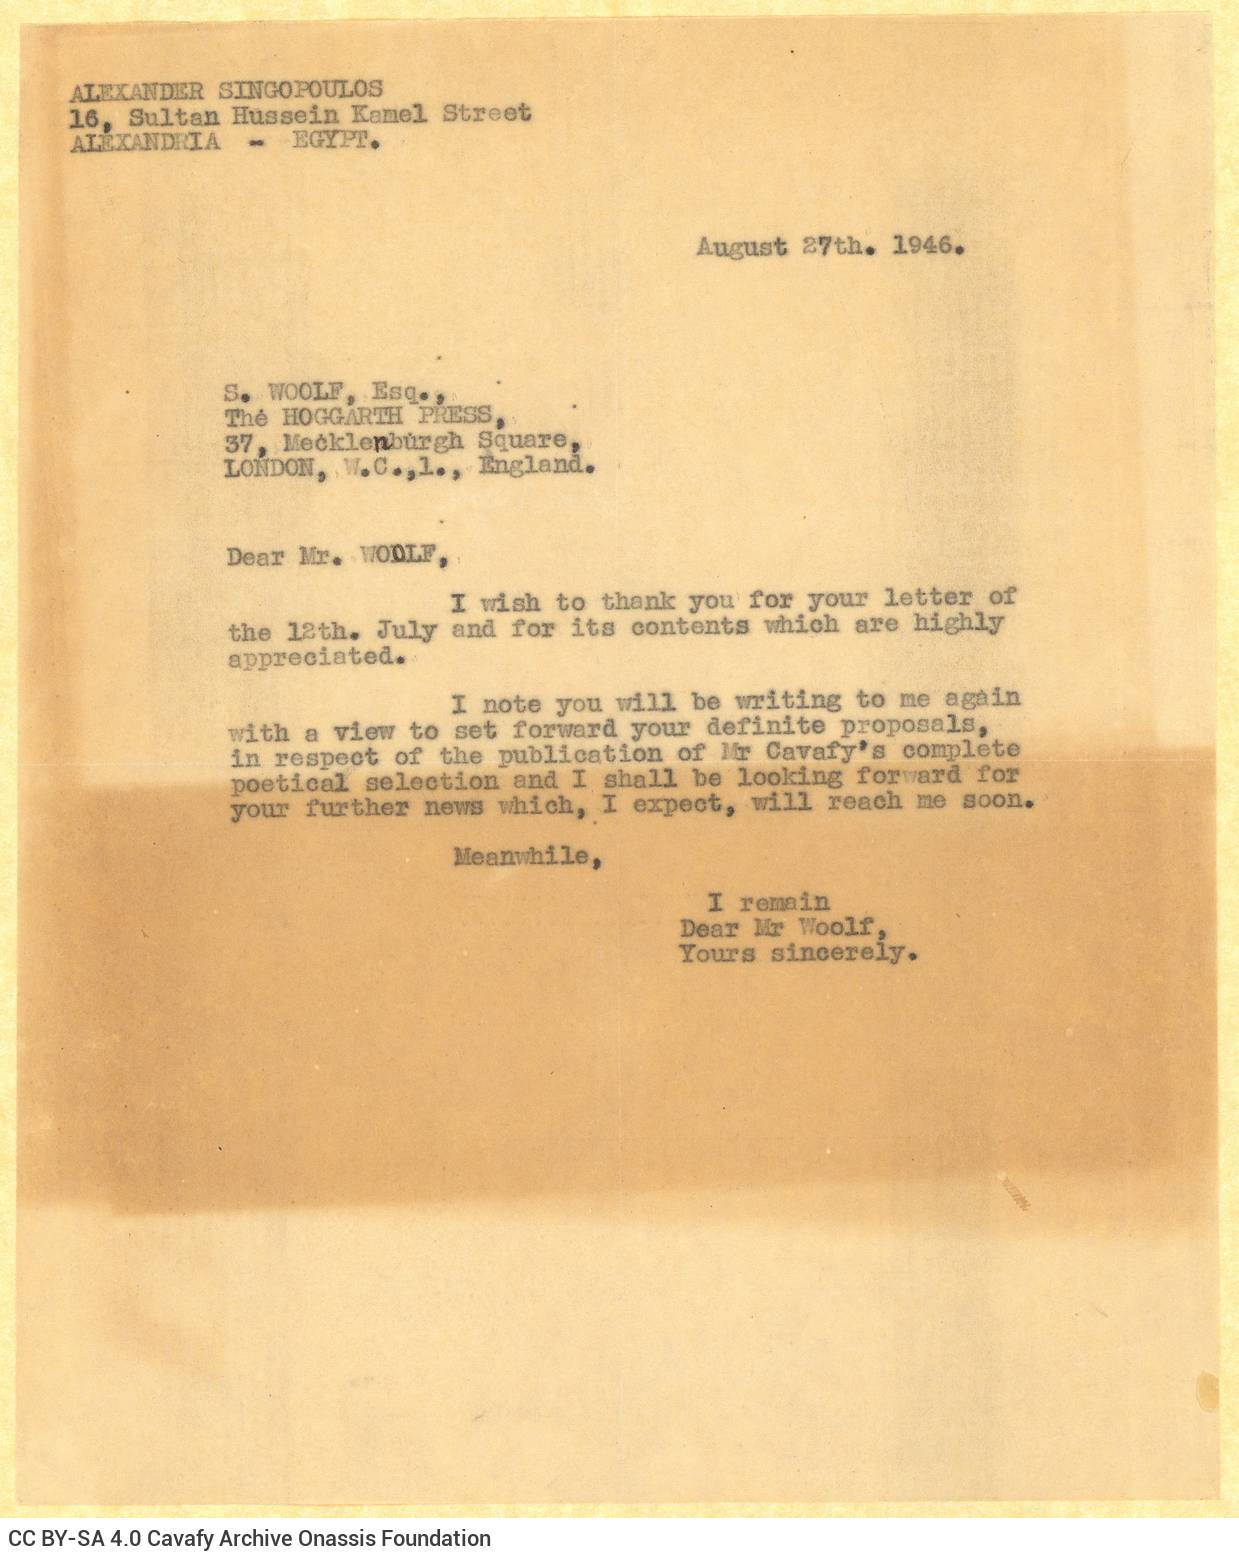 Typewritten copy of a letter by Alekos Singopoulo to Leonard Woolf on one side of a sheet. Blank verso. The sender awaits the